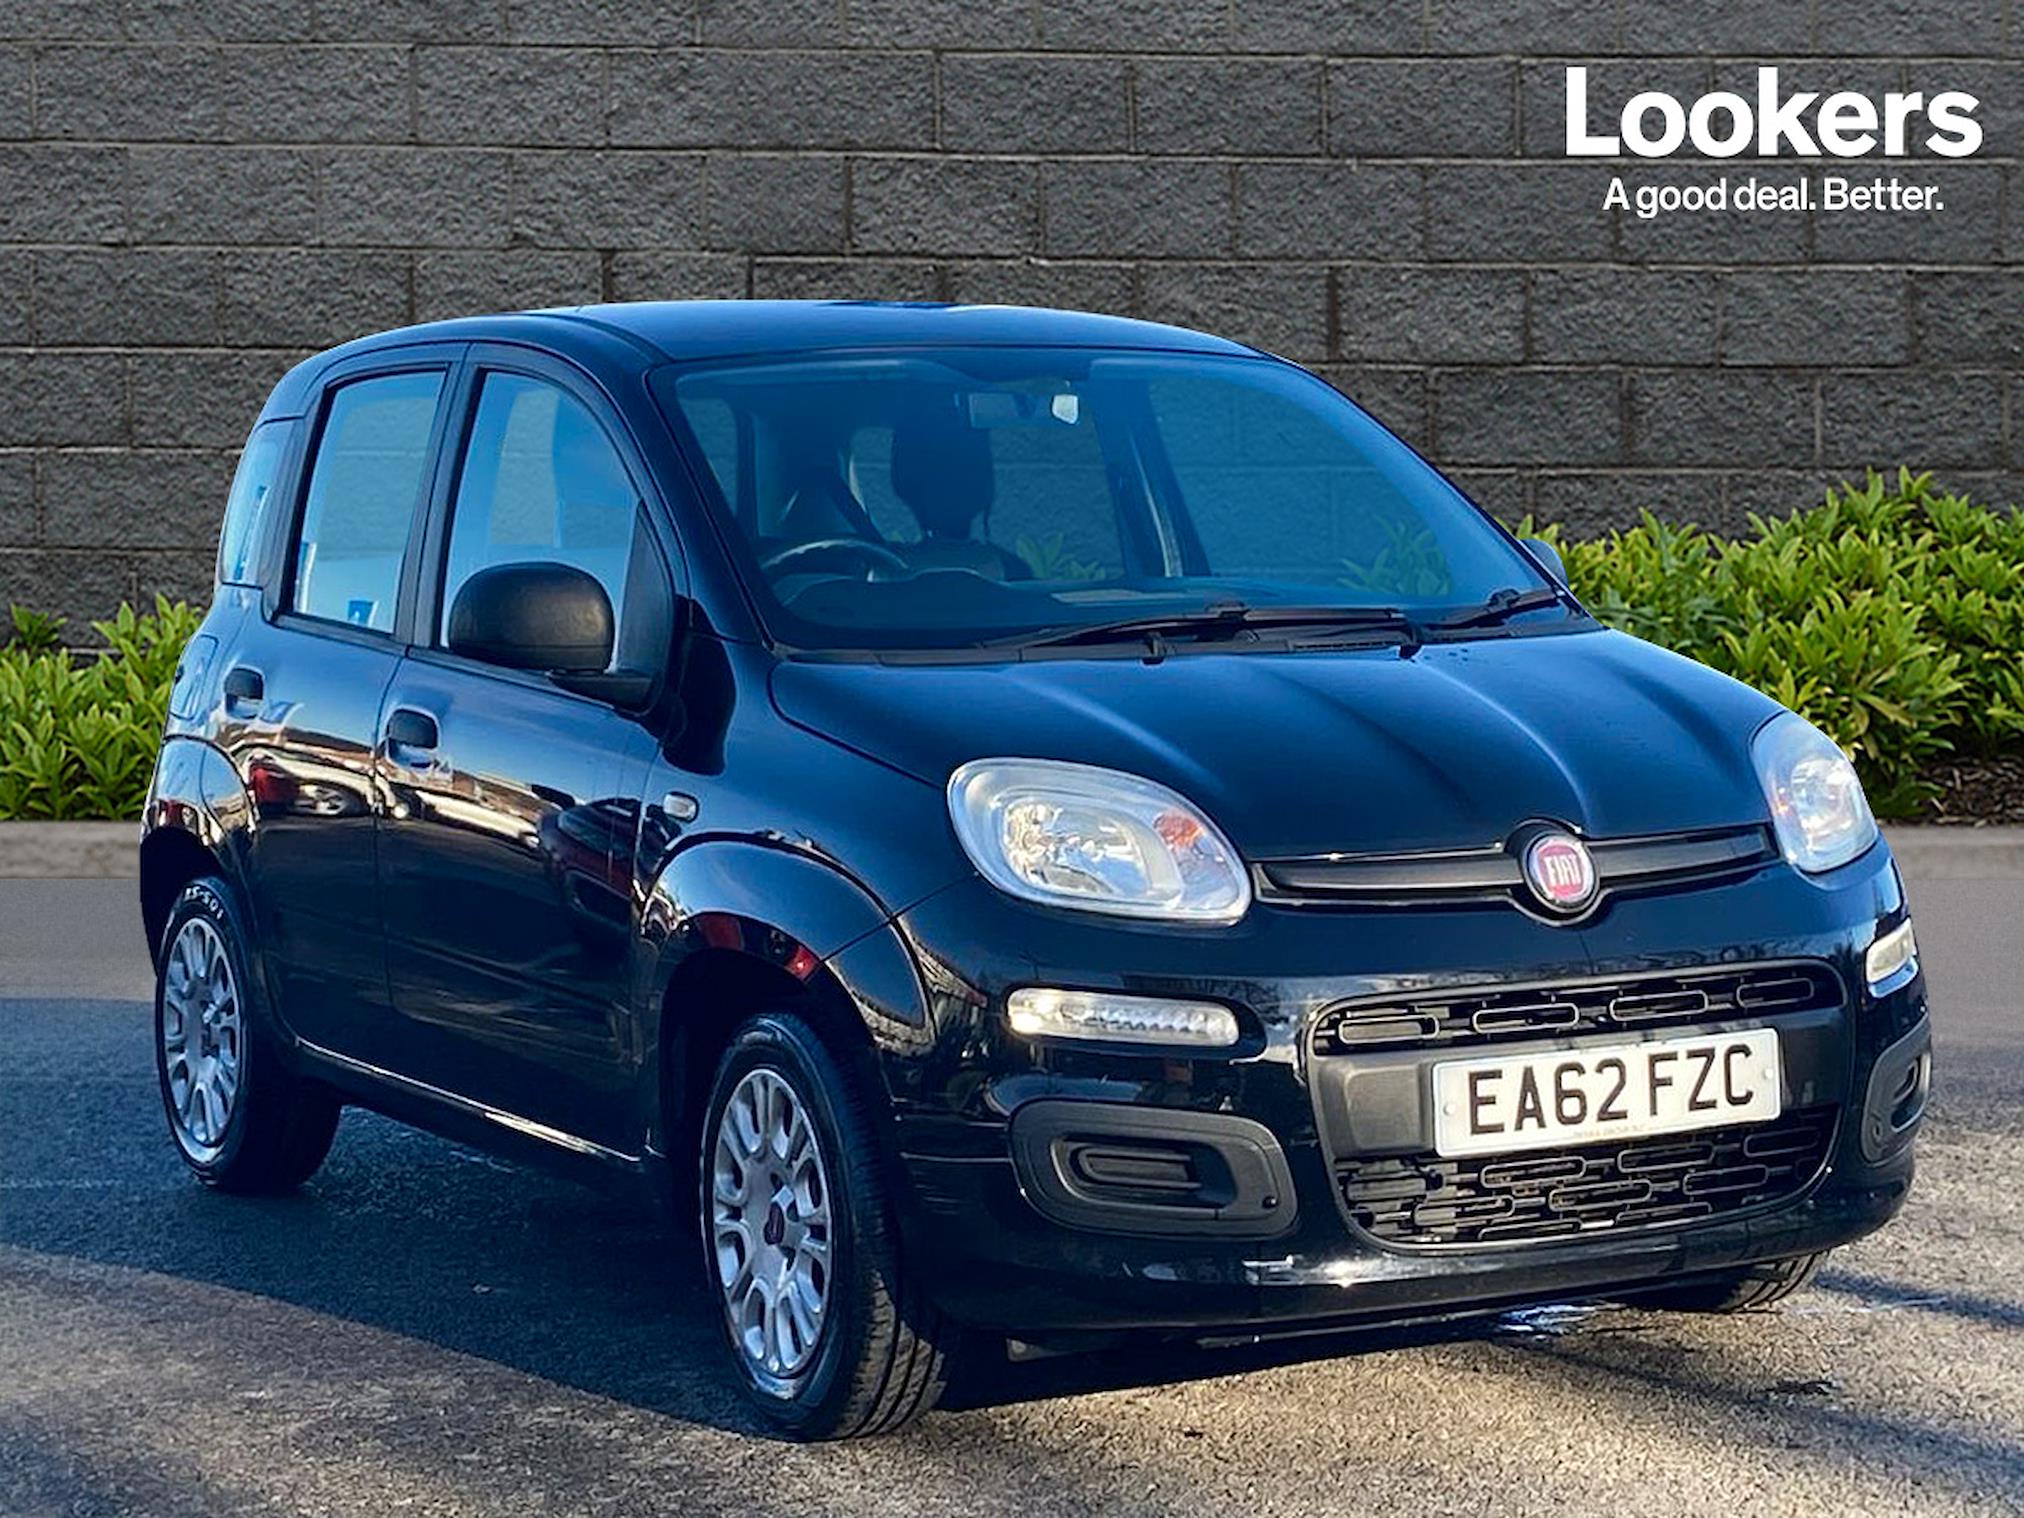 Used FIAT PANDA 1.2 Pop 5Dr 2012 | Lookers